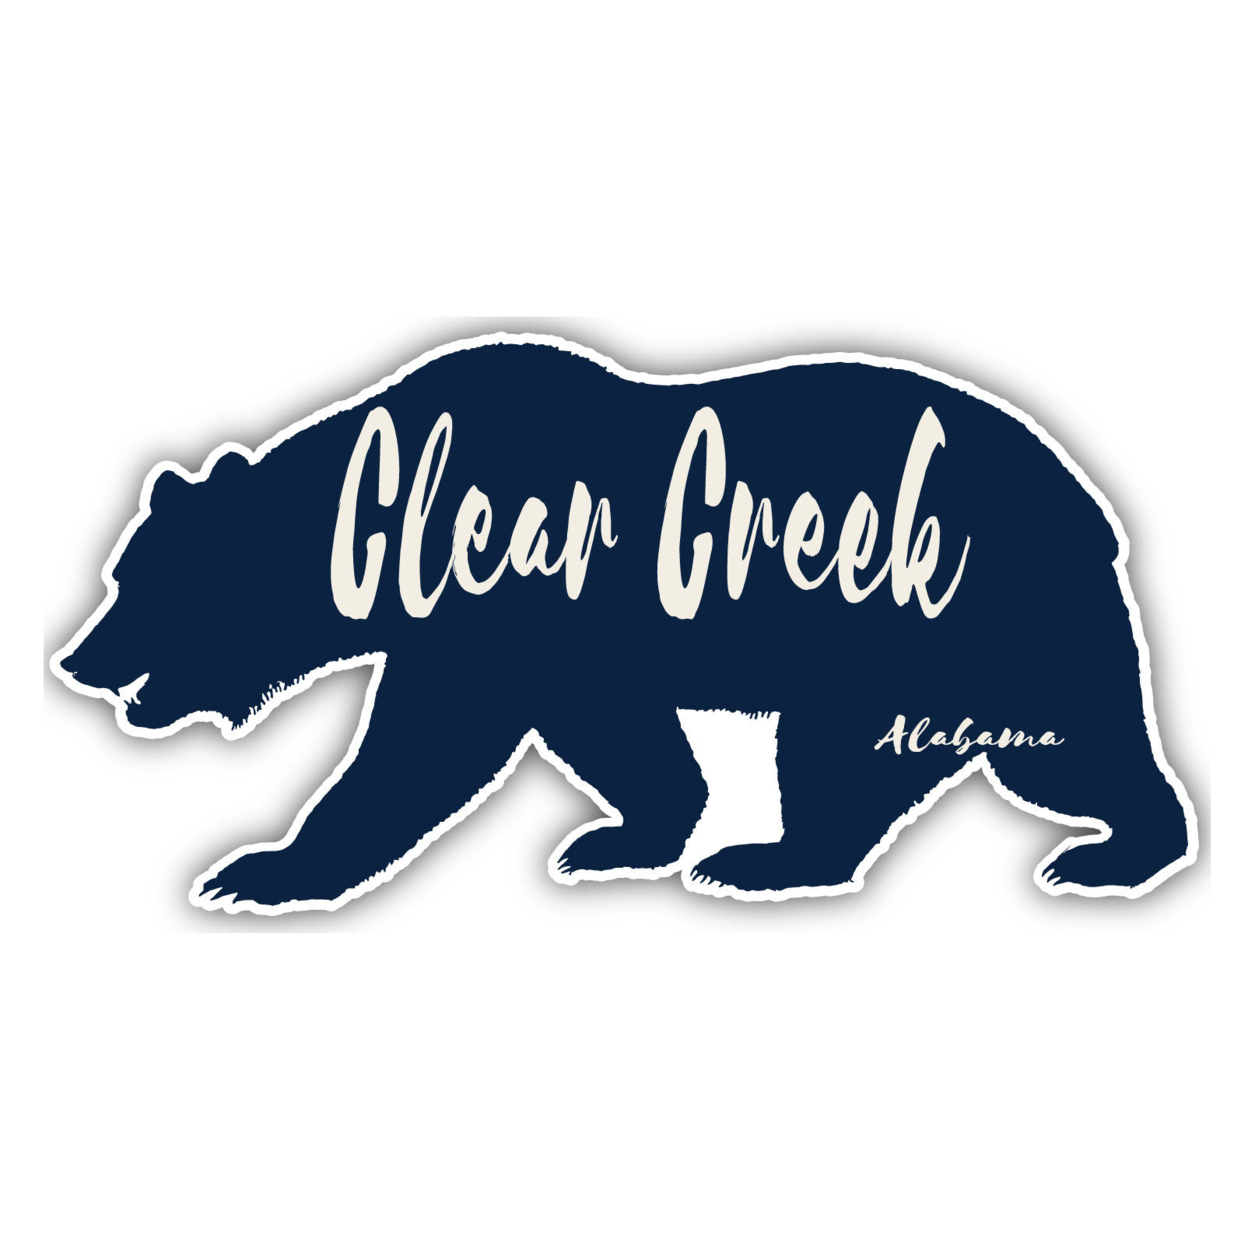 Clear Creek Alabama Souvenir Decorative Stickers (Choose Theme And Size) - 4-Pack, 6-Inch, Bear